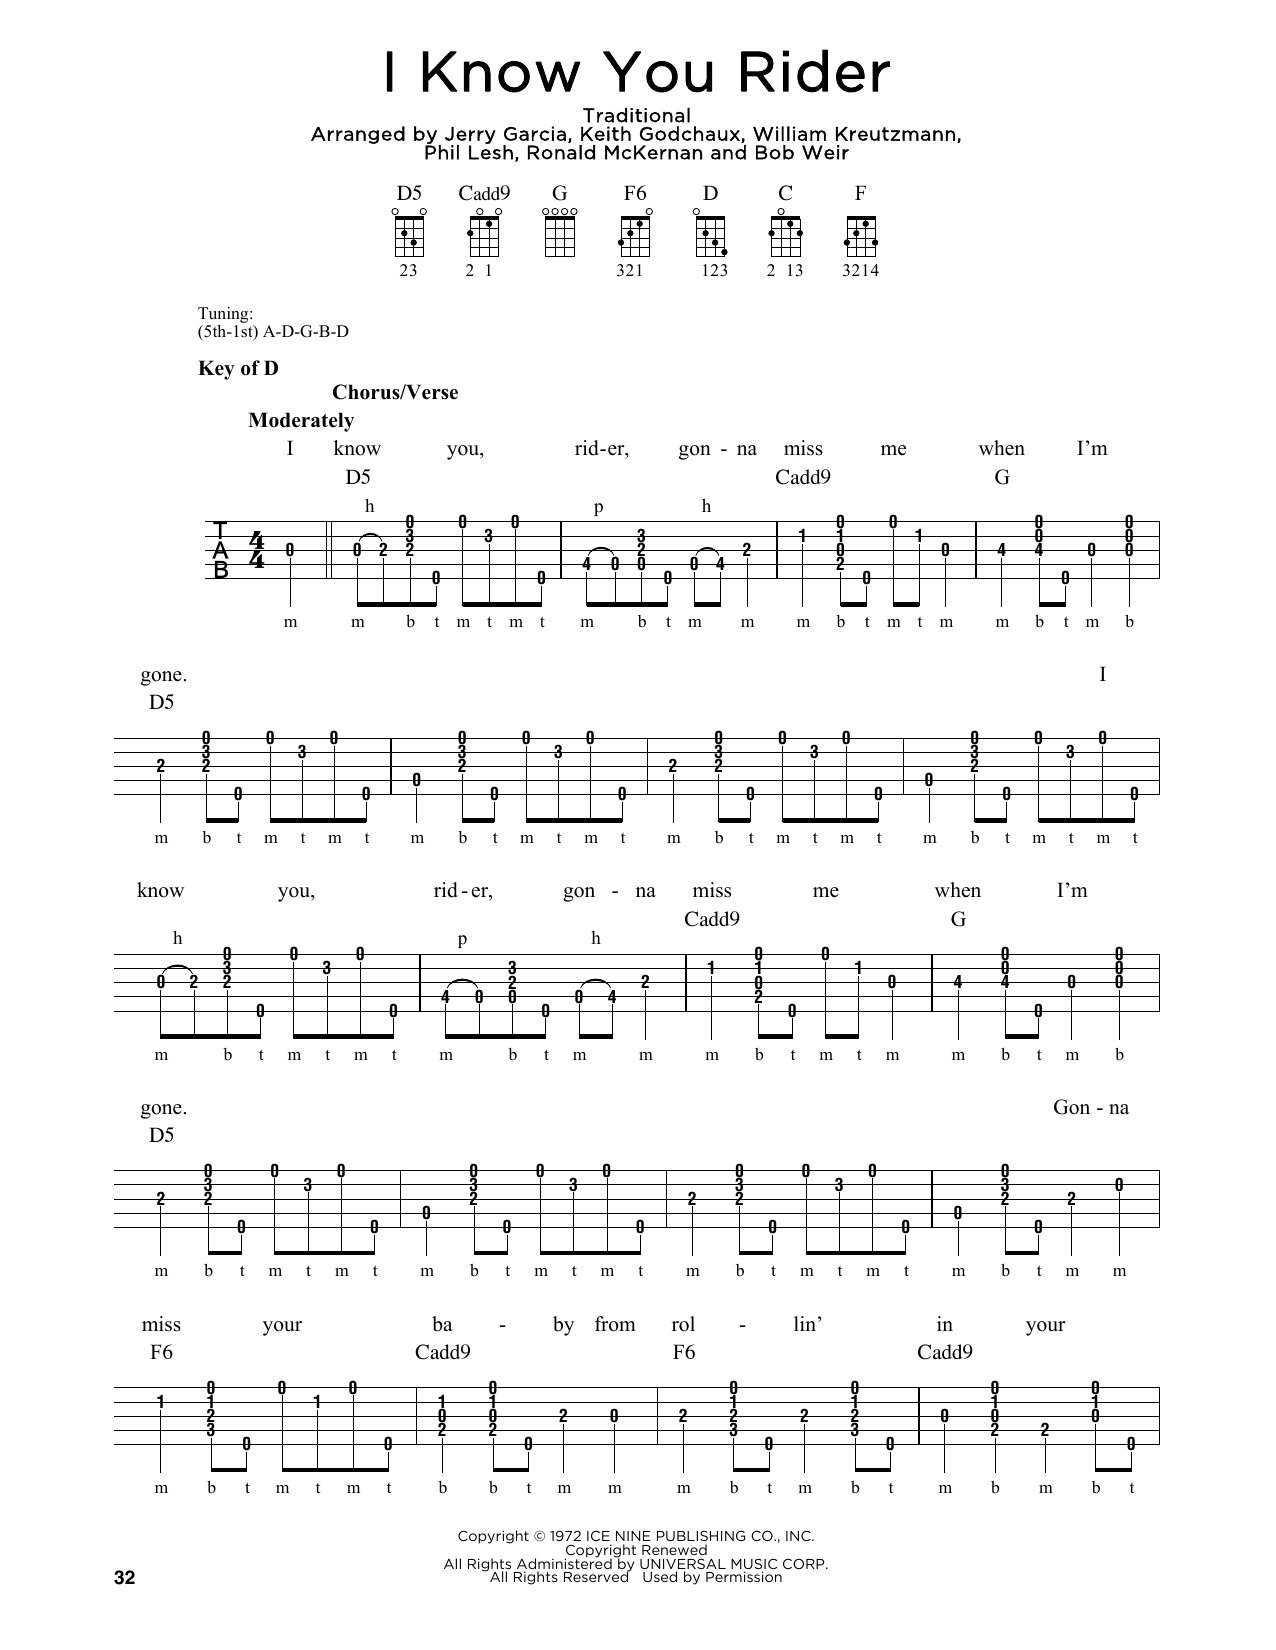 Download Grateful Dead I Know You Rider Sheet Music